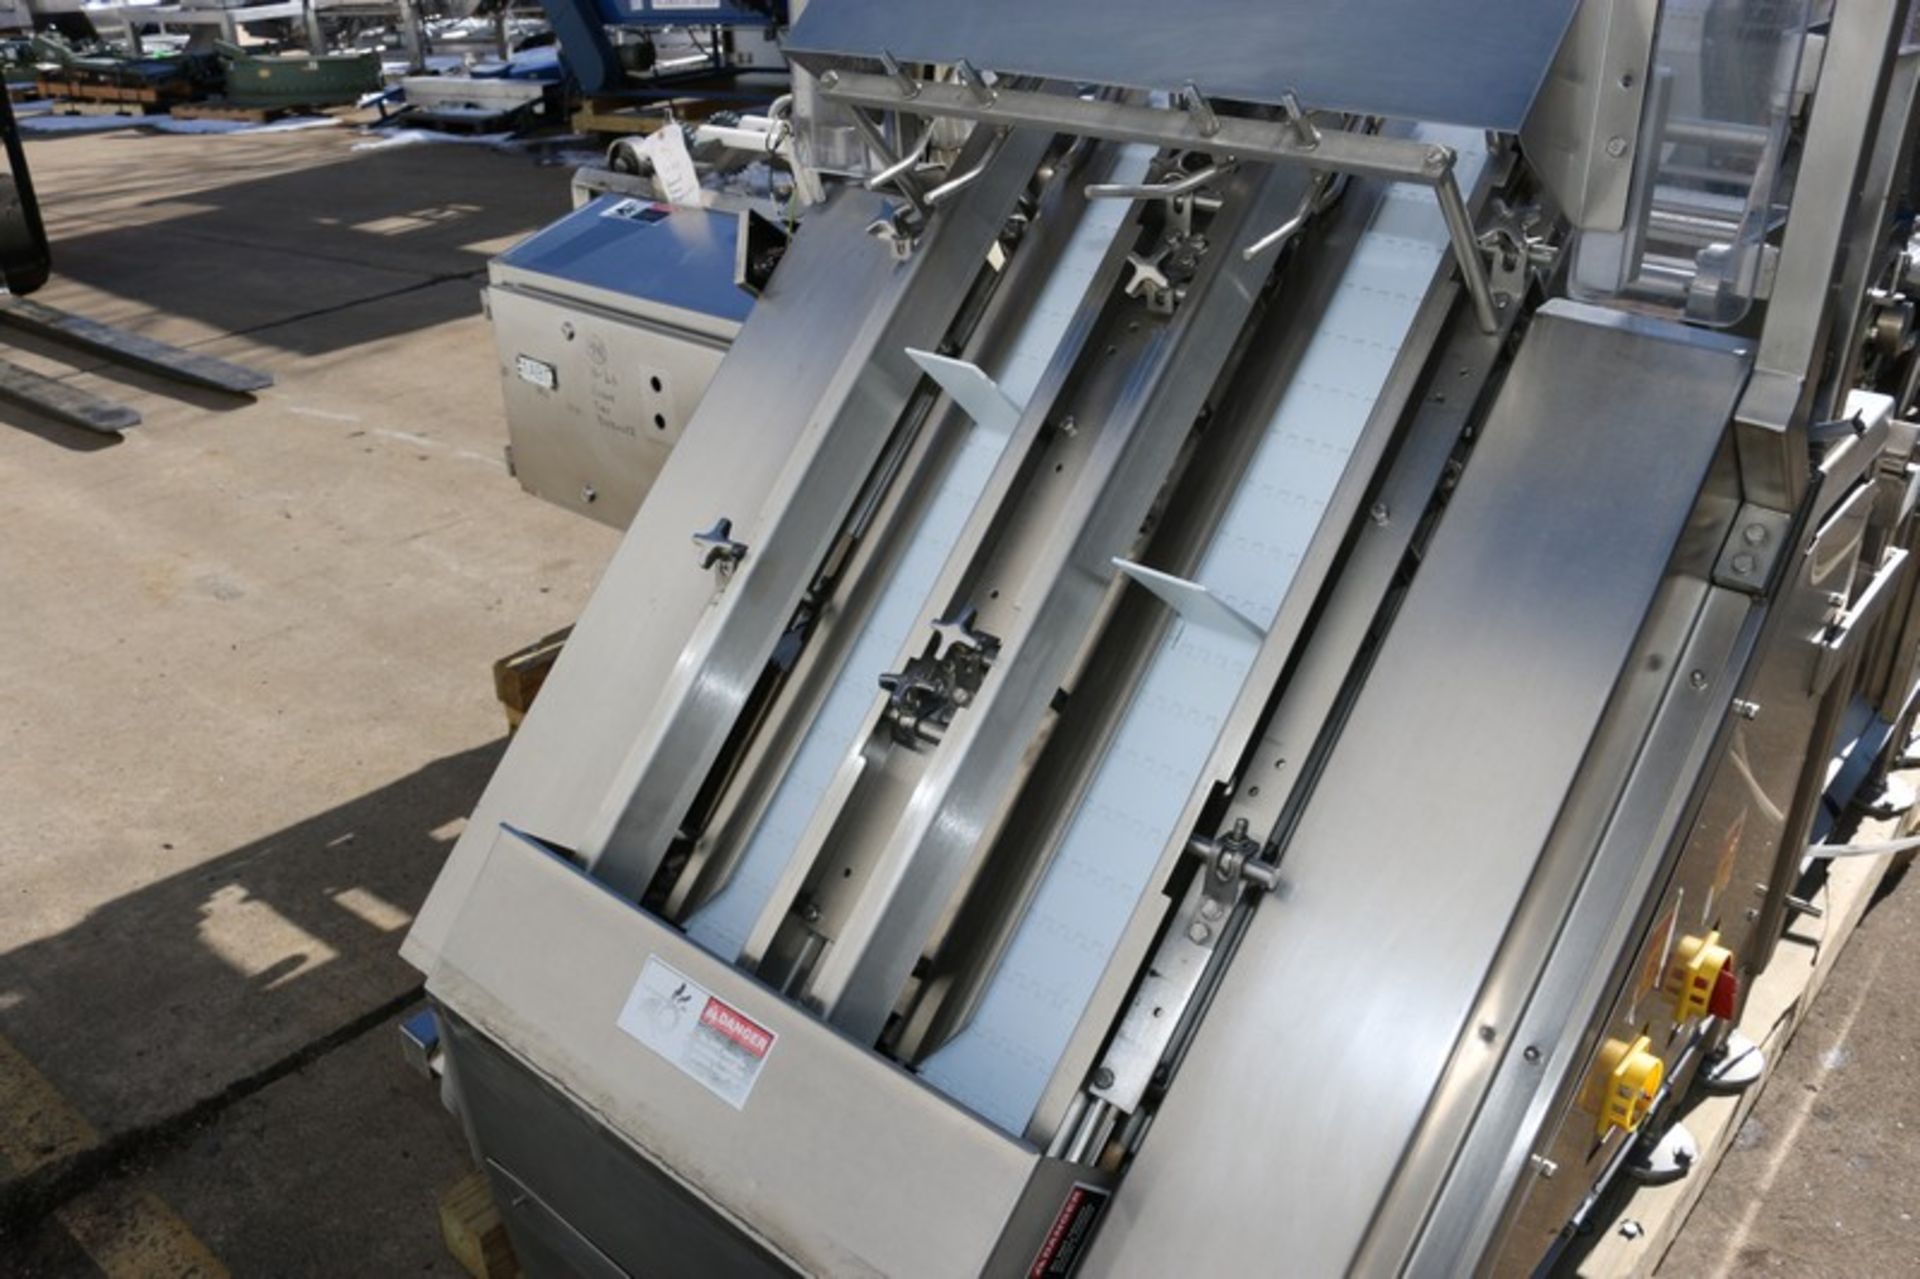 Raque S/S Tray Dispenser, 2-Lanes of Aprox. 8" W Outfeed Conveyor, with 4-Head Pick N' Place - Image 6 of 11